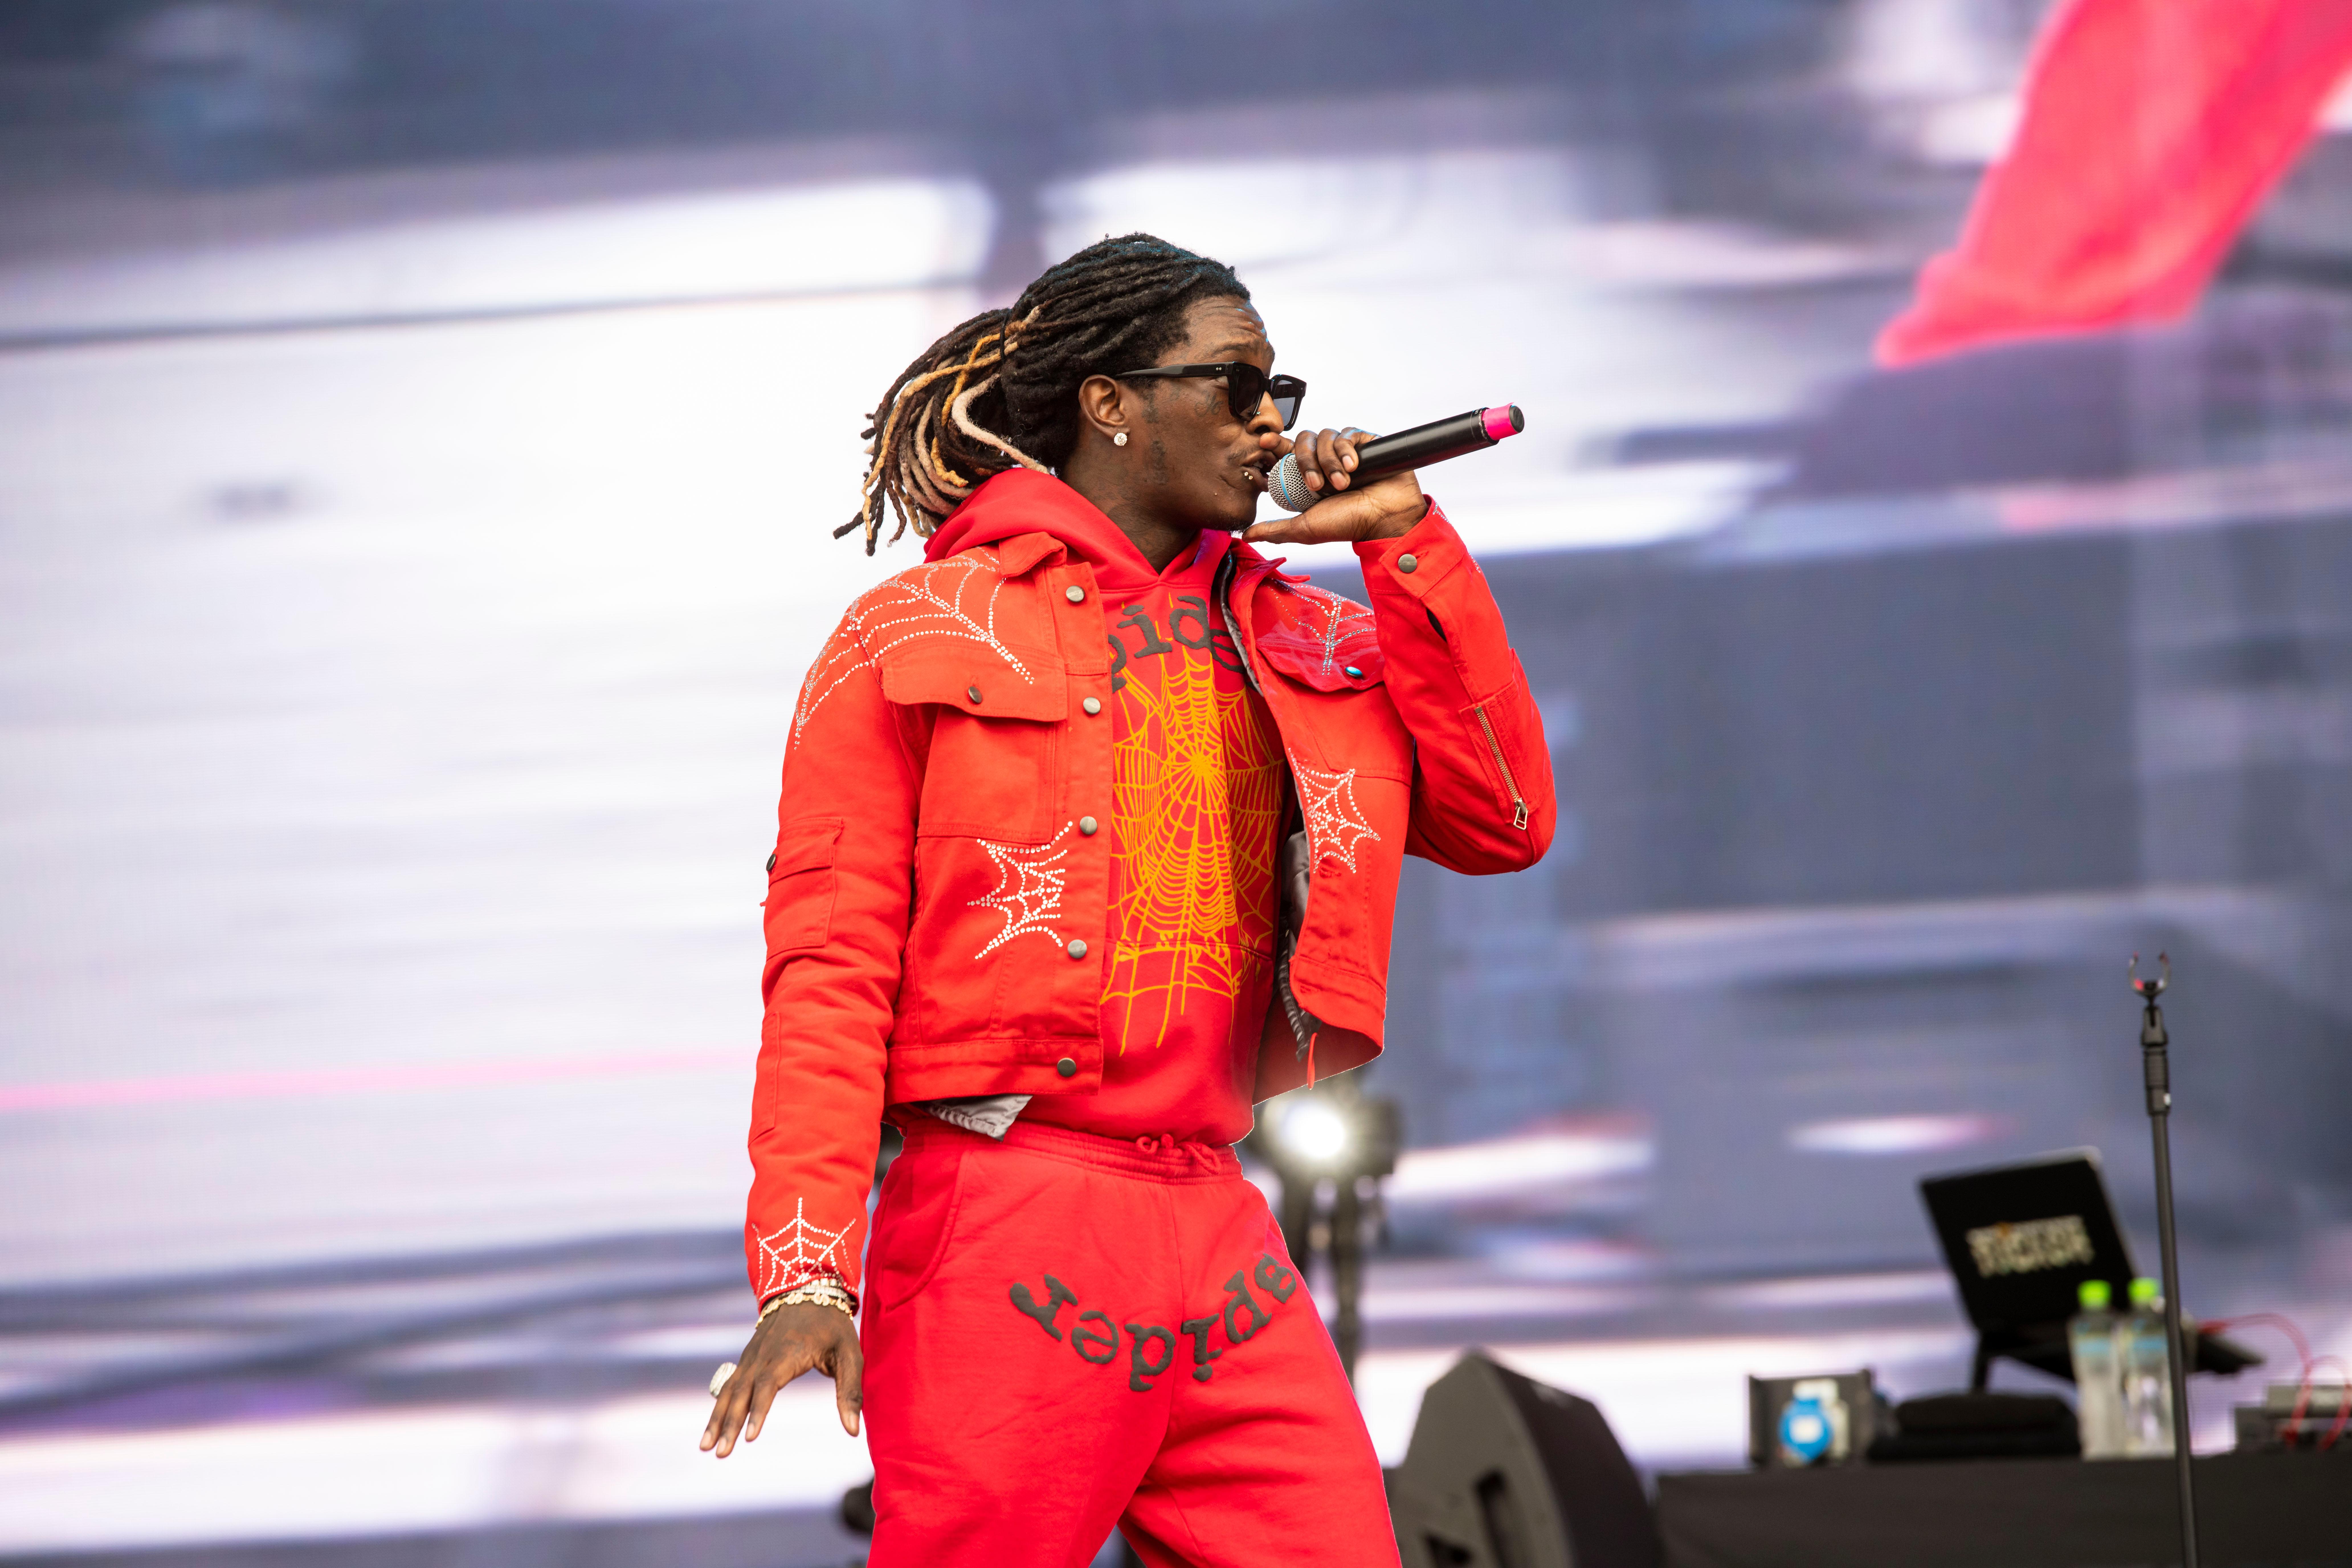 Young Thug performing live on the Main Stage, Wireless Festival, Finsbury Park - London - 6th July 2019